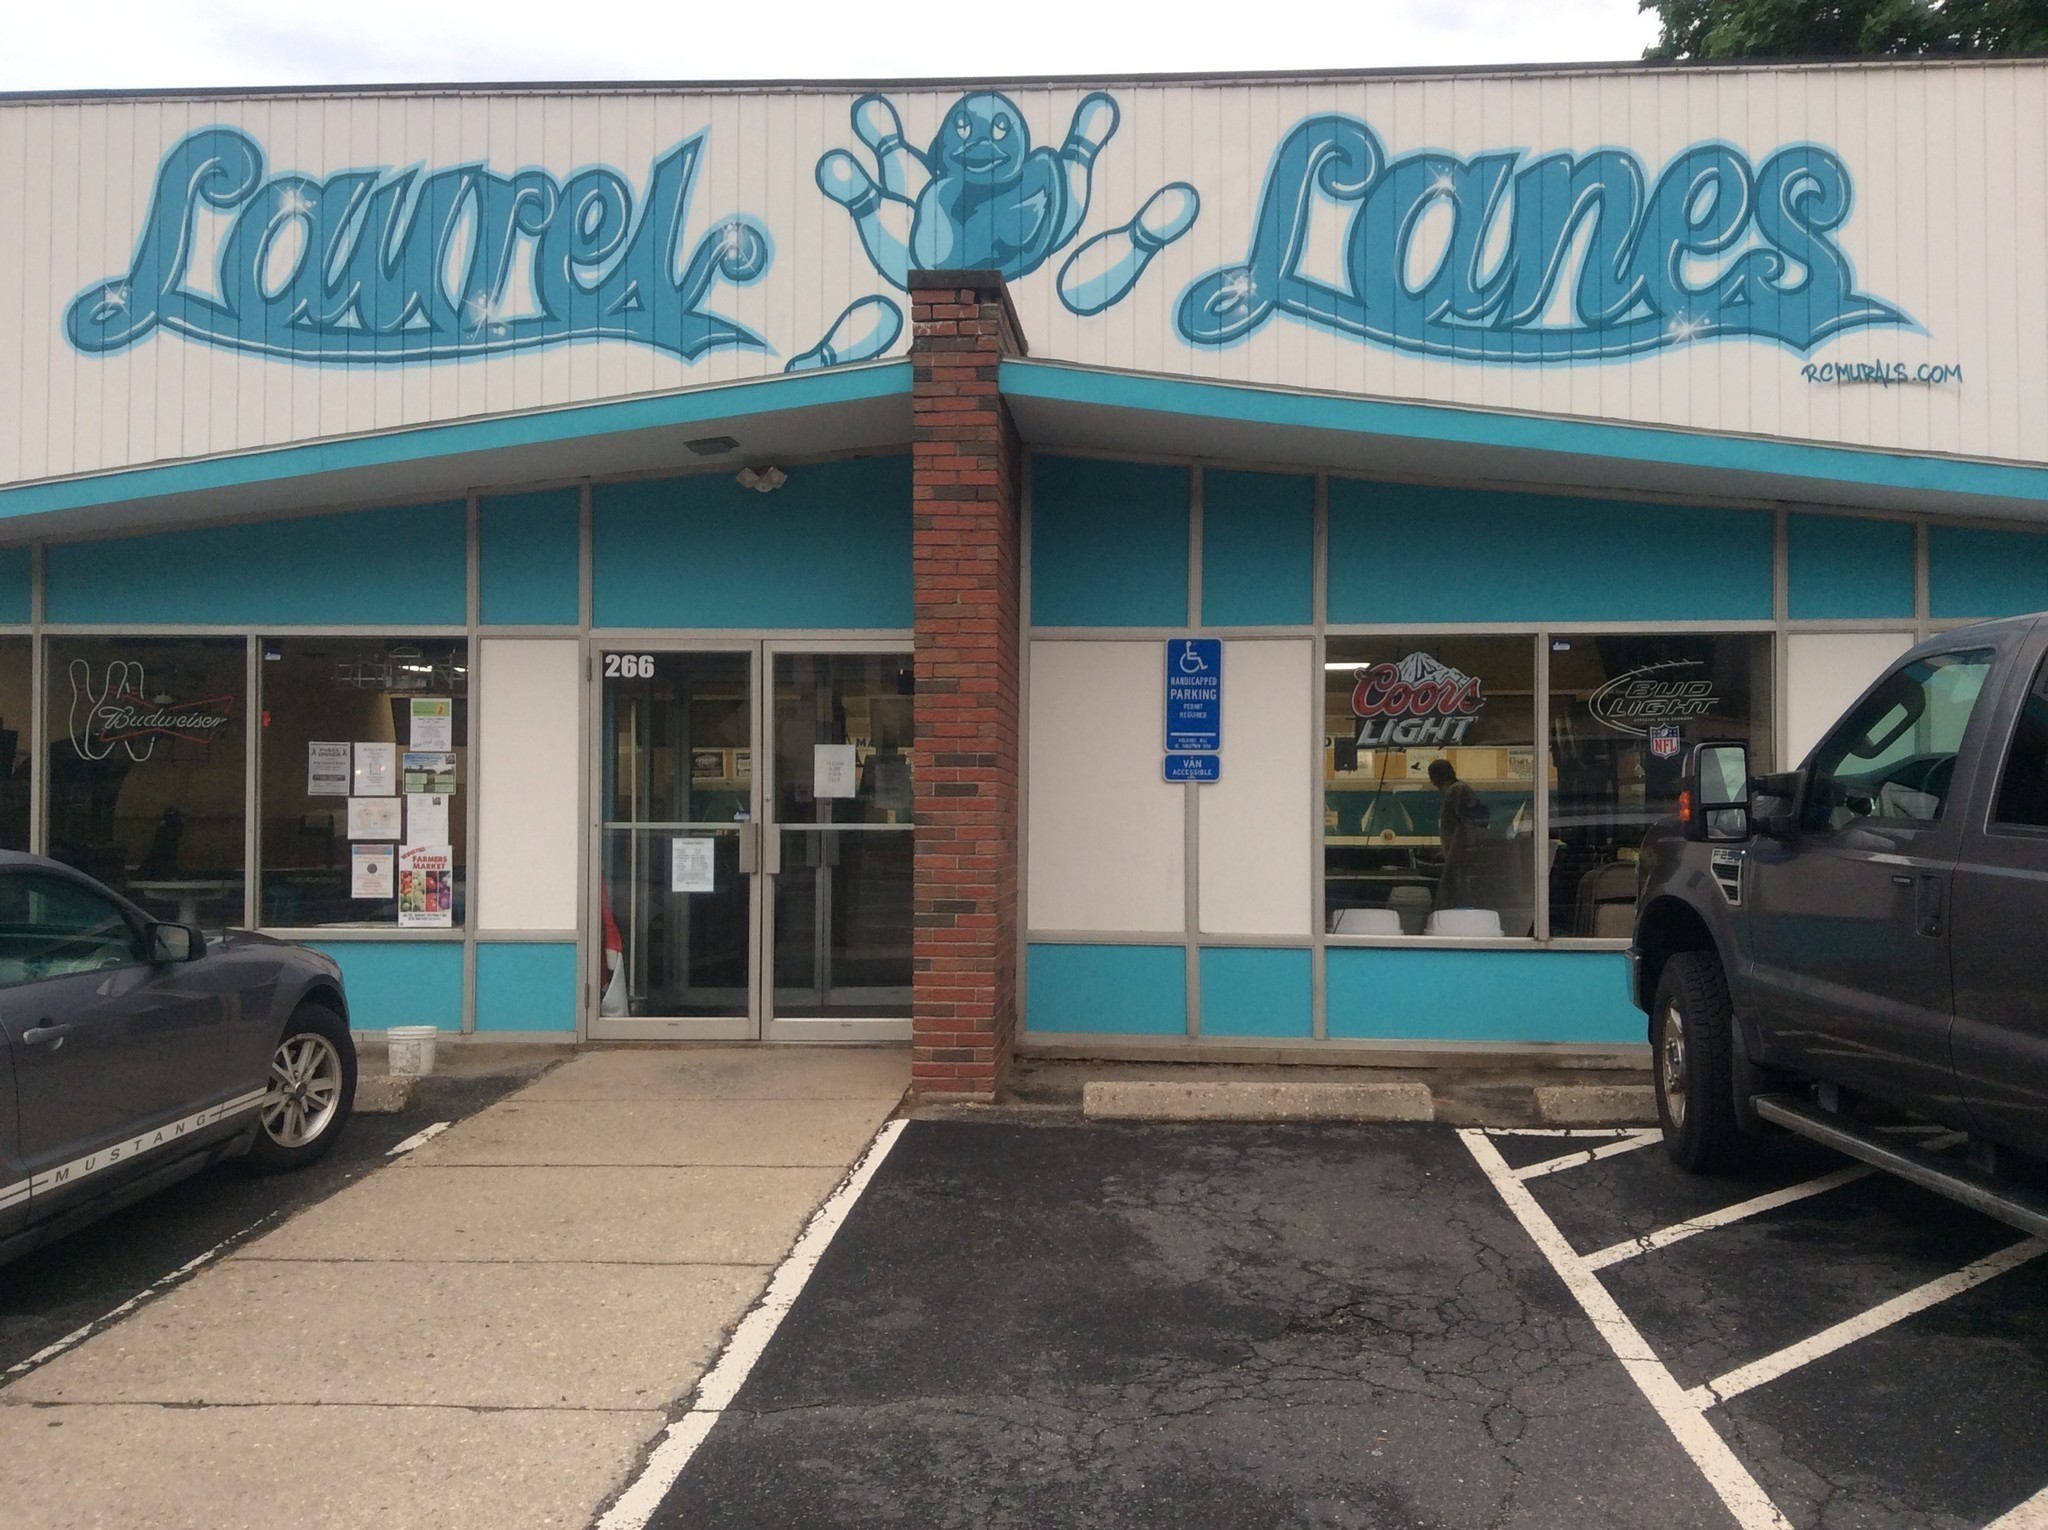 Winsted's Laurel Lanes An Example Of A Community's Spirit - Hartford Courant